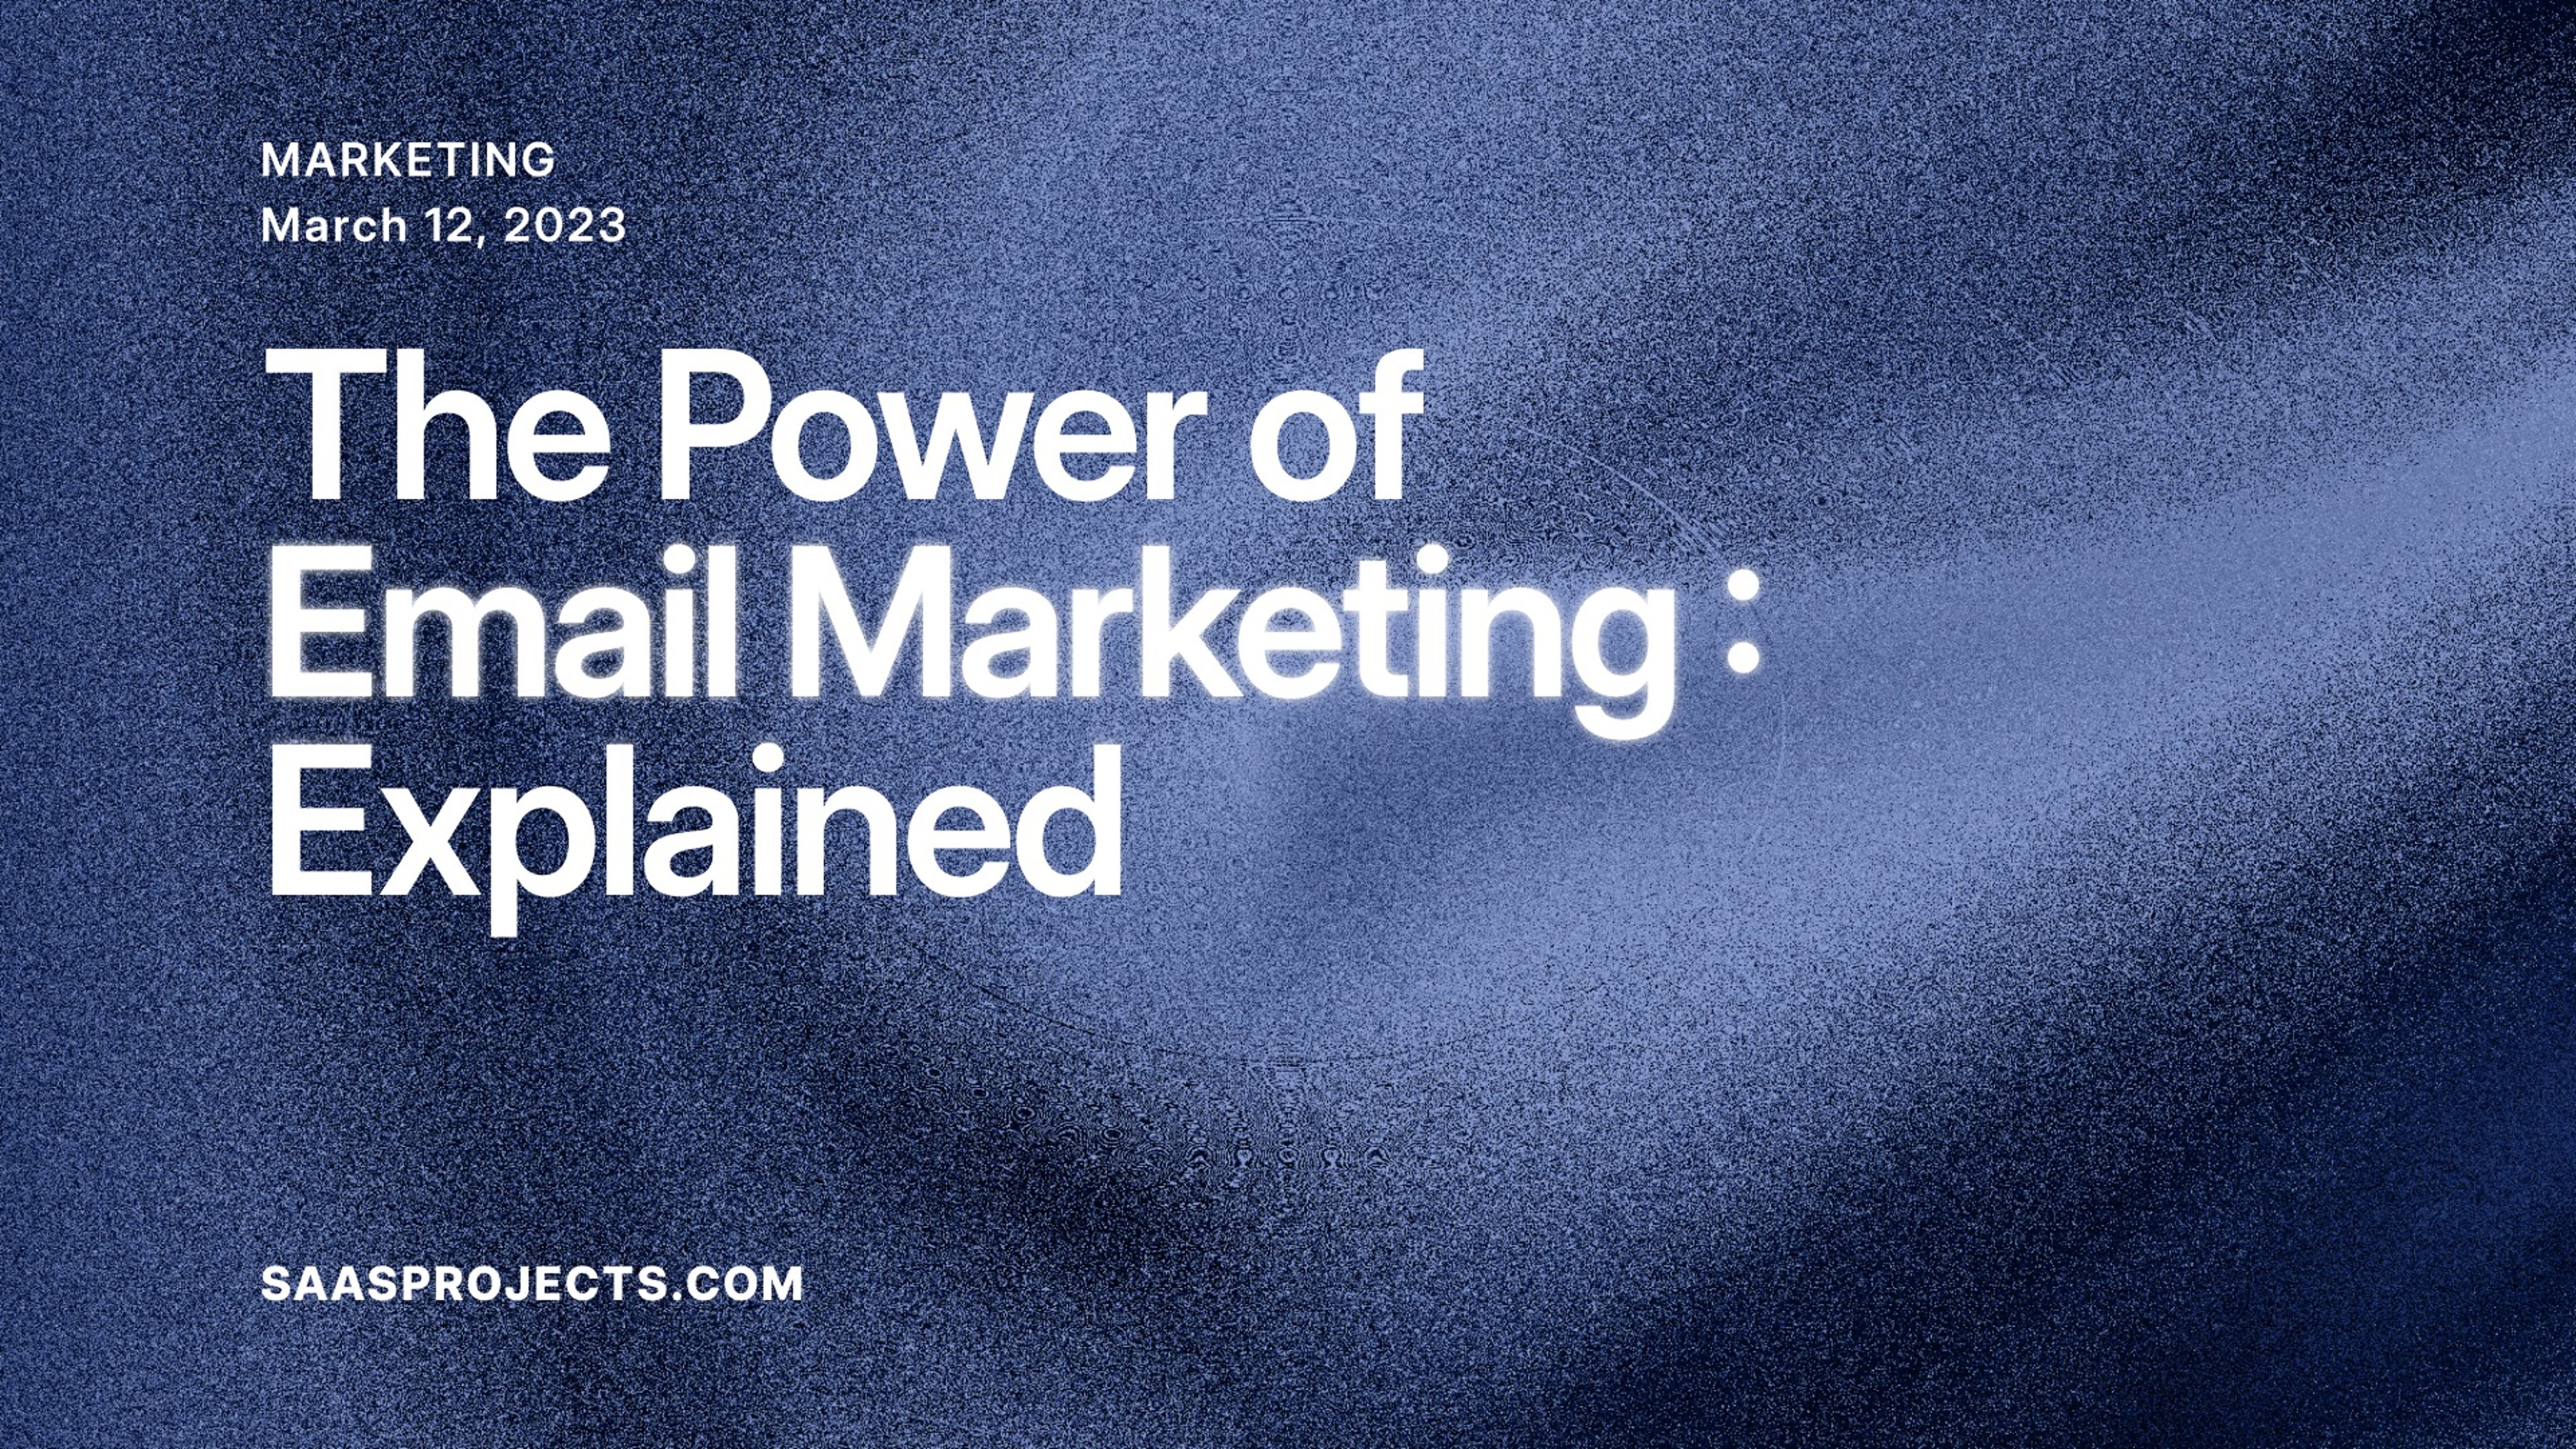 The Power of Email Marketing: Explained